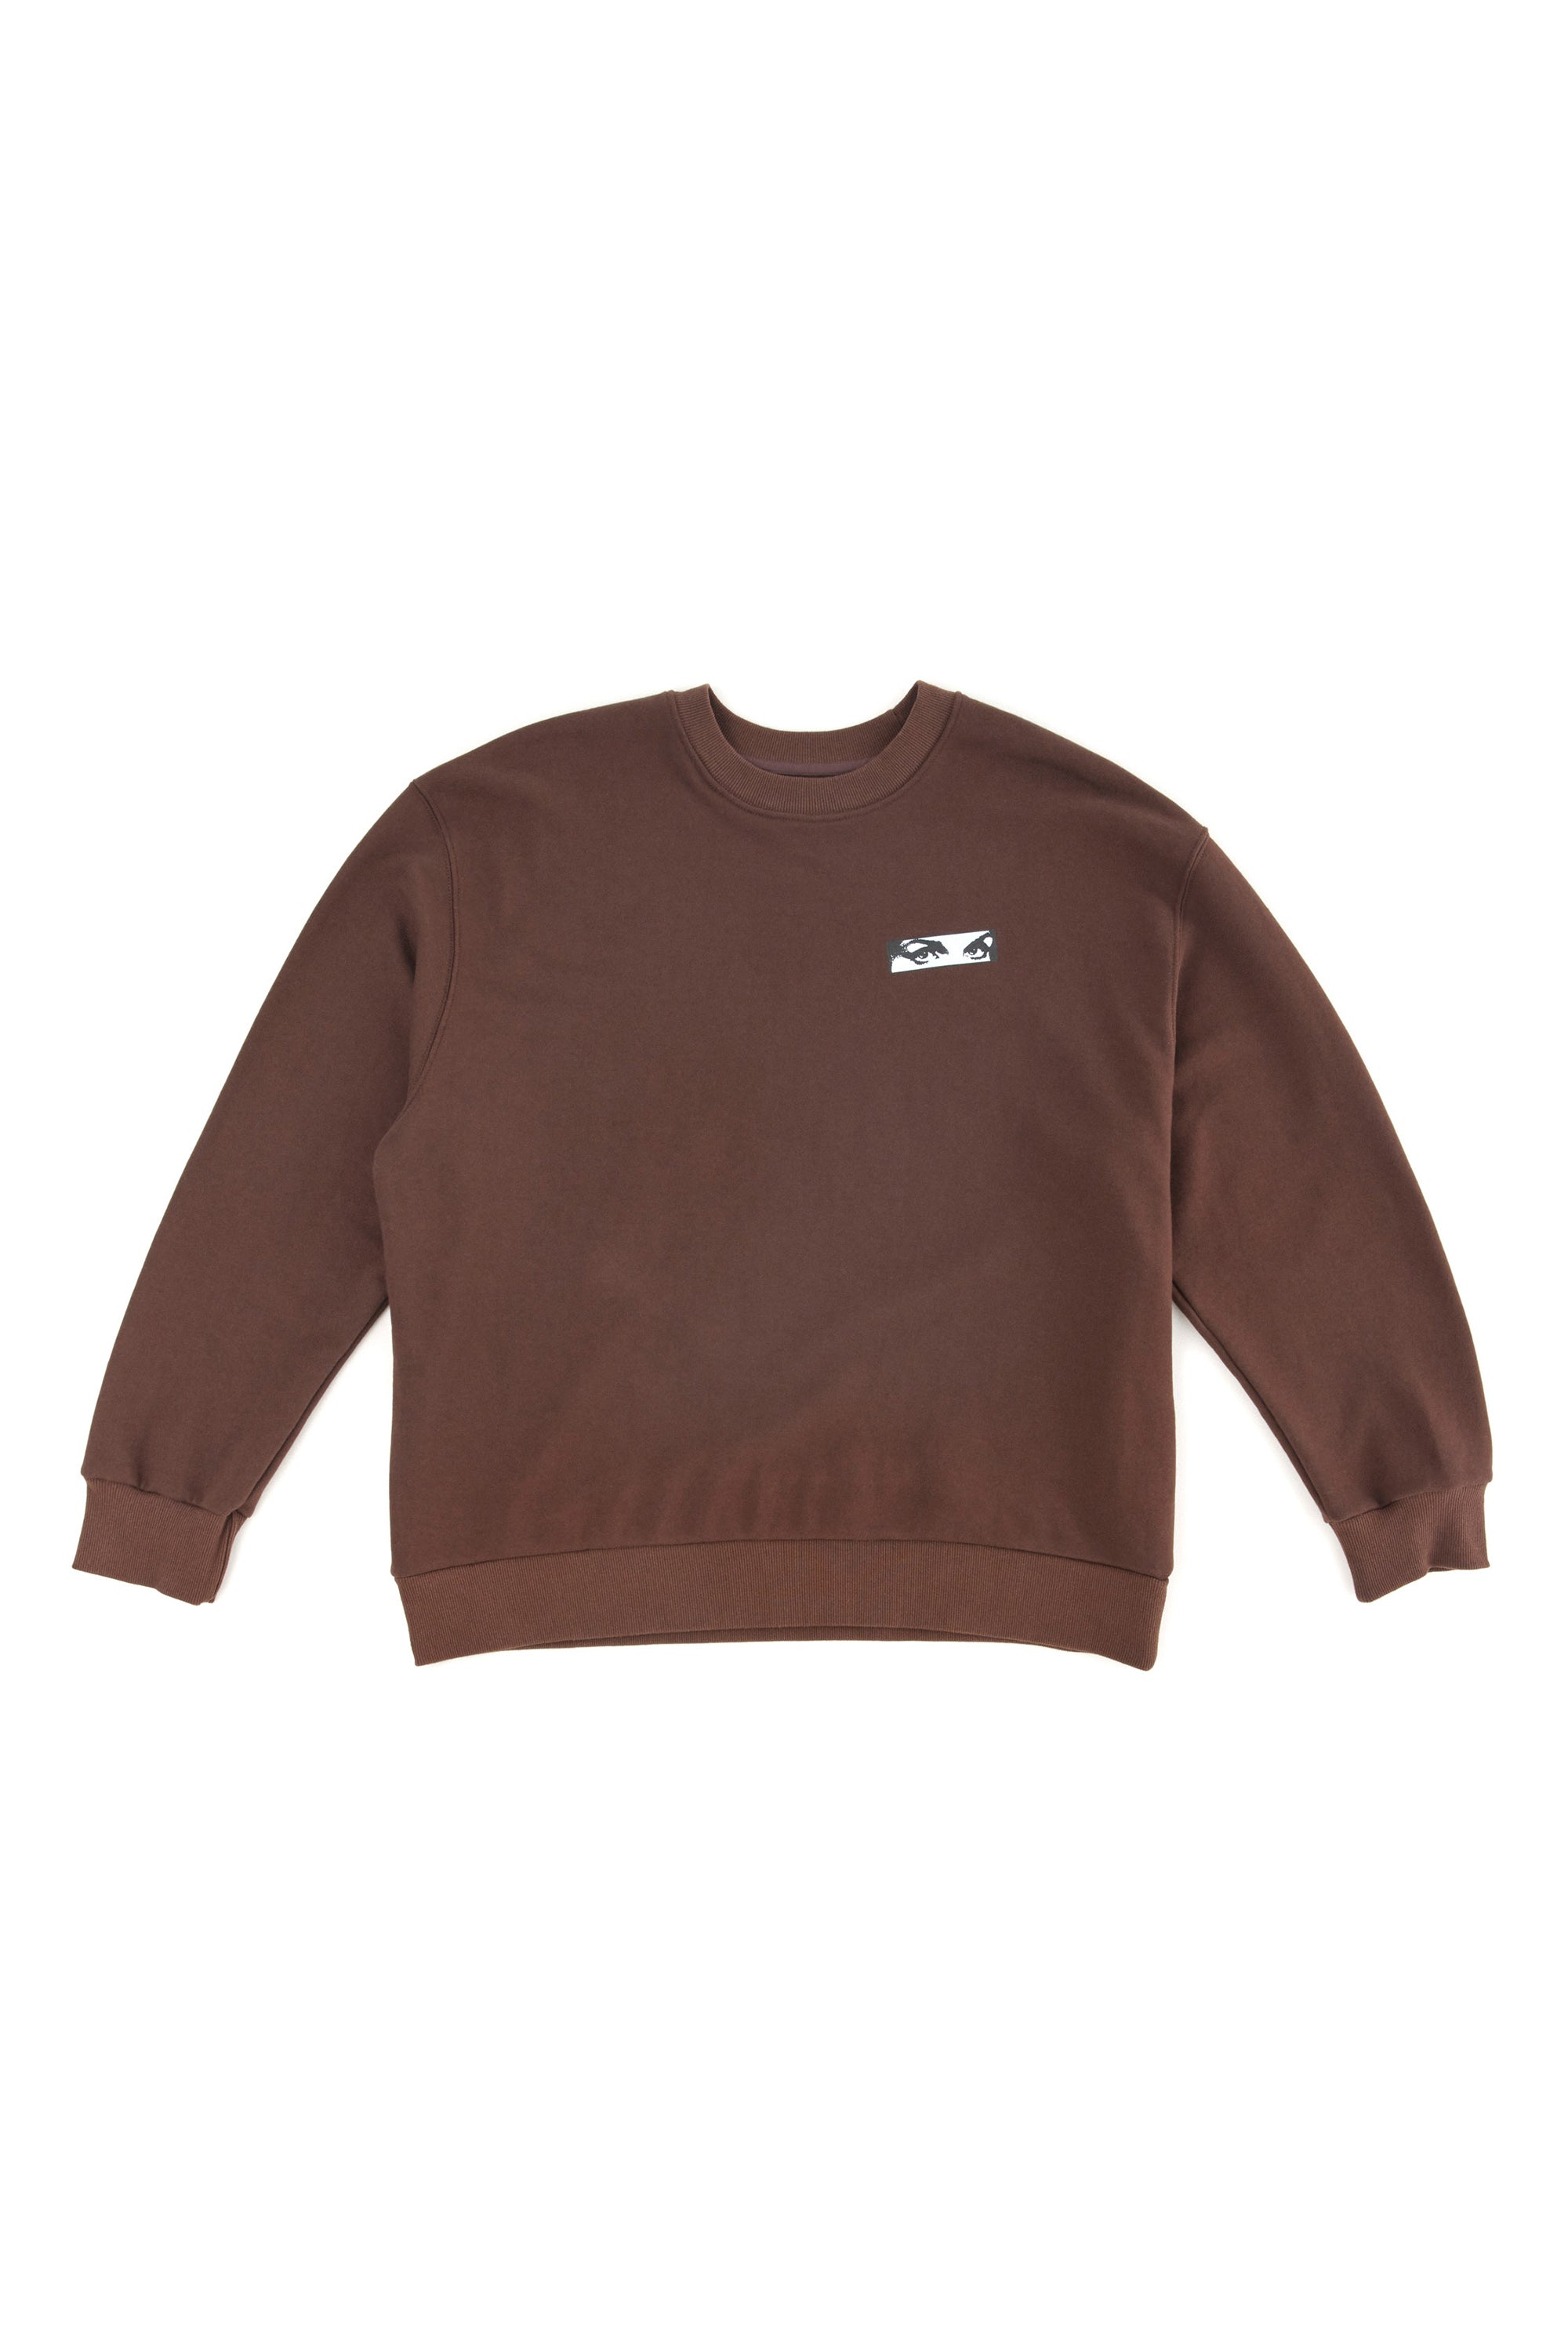 The FLOATING EYES CREW NECK SWEAT  available online with global shipping, and in PAM Stores Melbourne and Sydney.